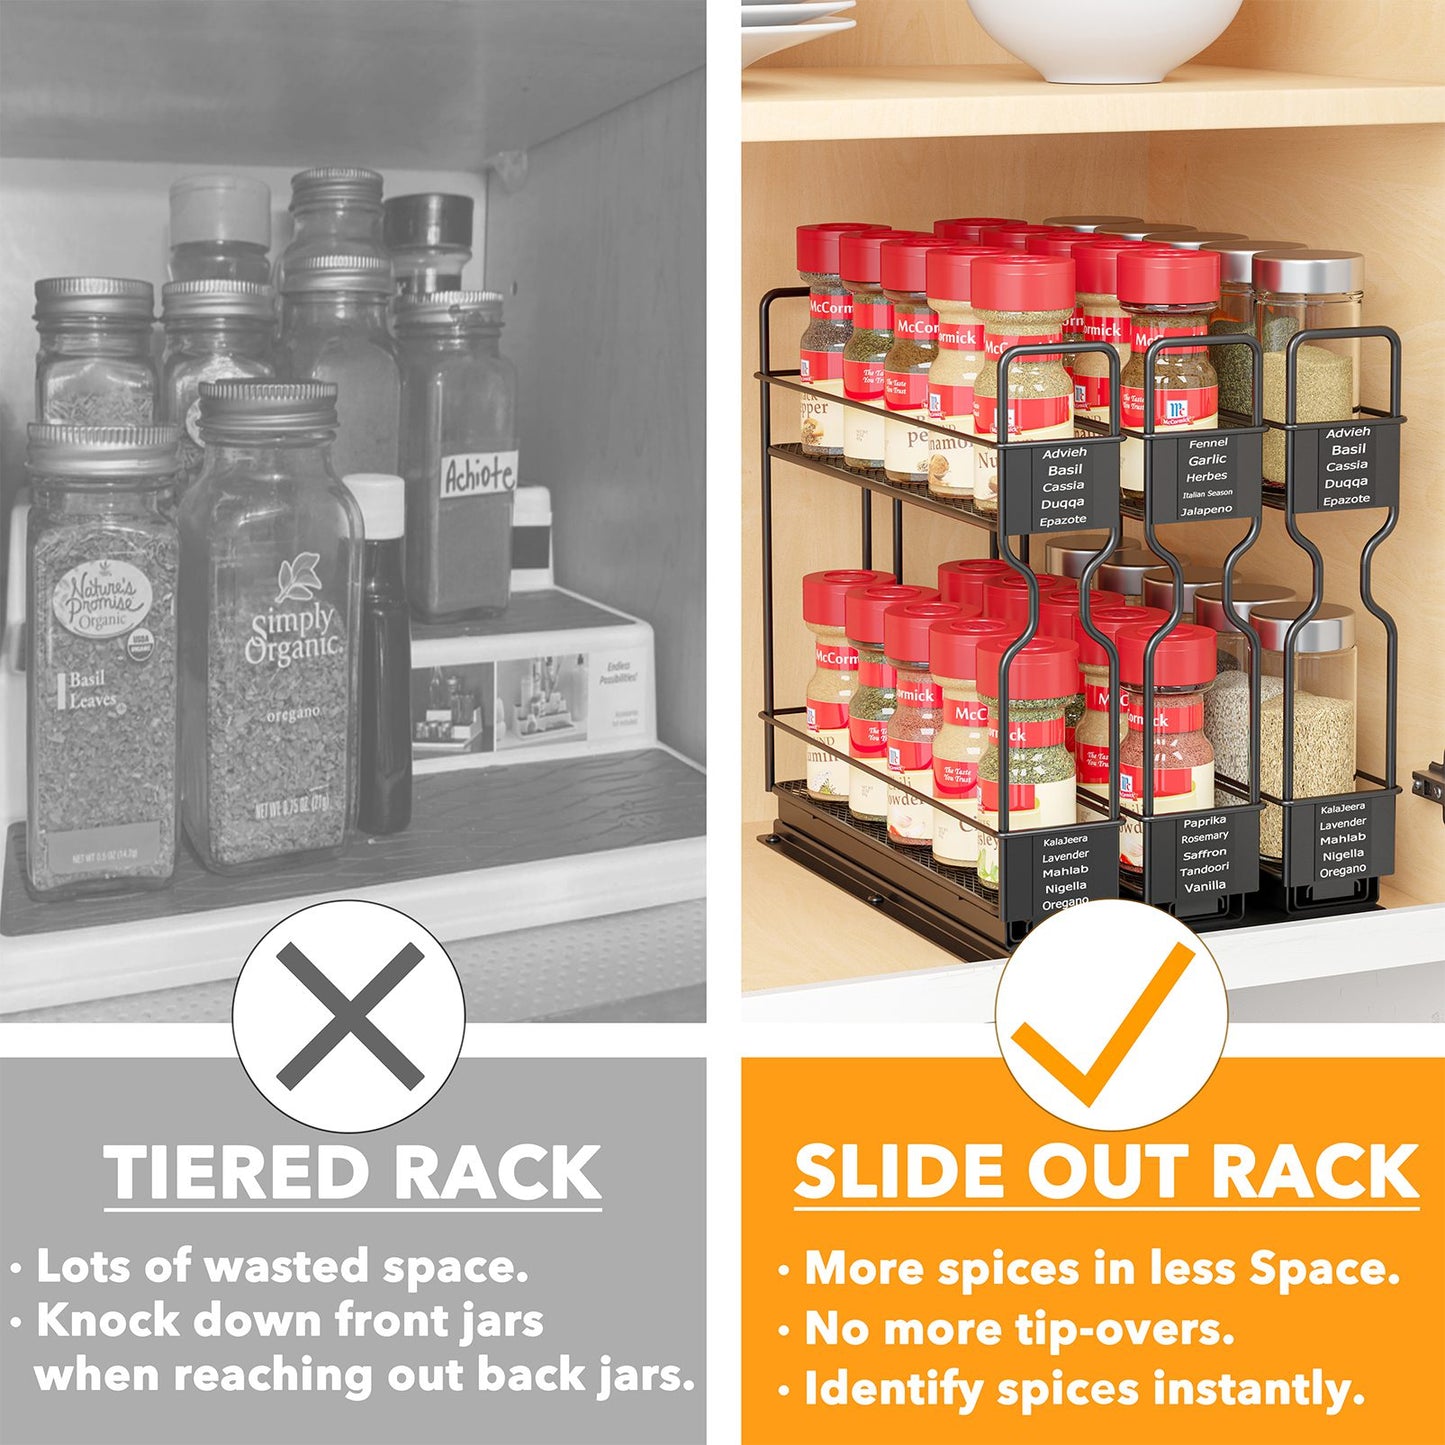 SpaceAid® 3 Drawers 2-Tier Pull Out Spice Rack Heavy Duty Slide Out Spice Cabinet Organizers